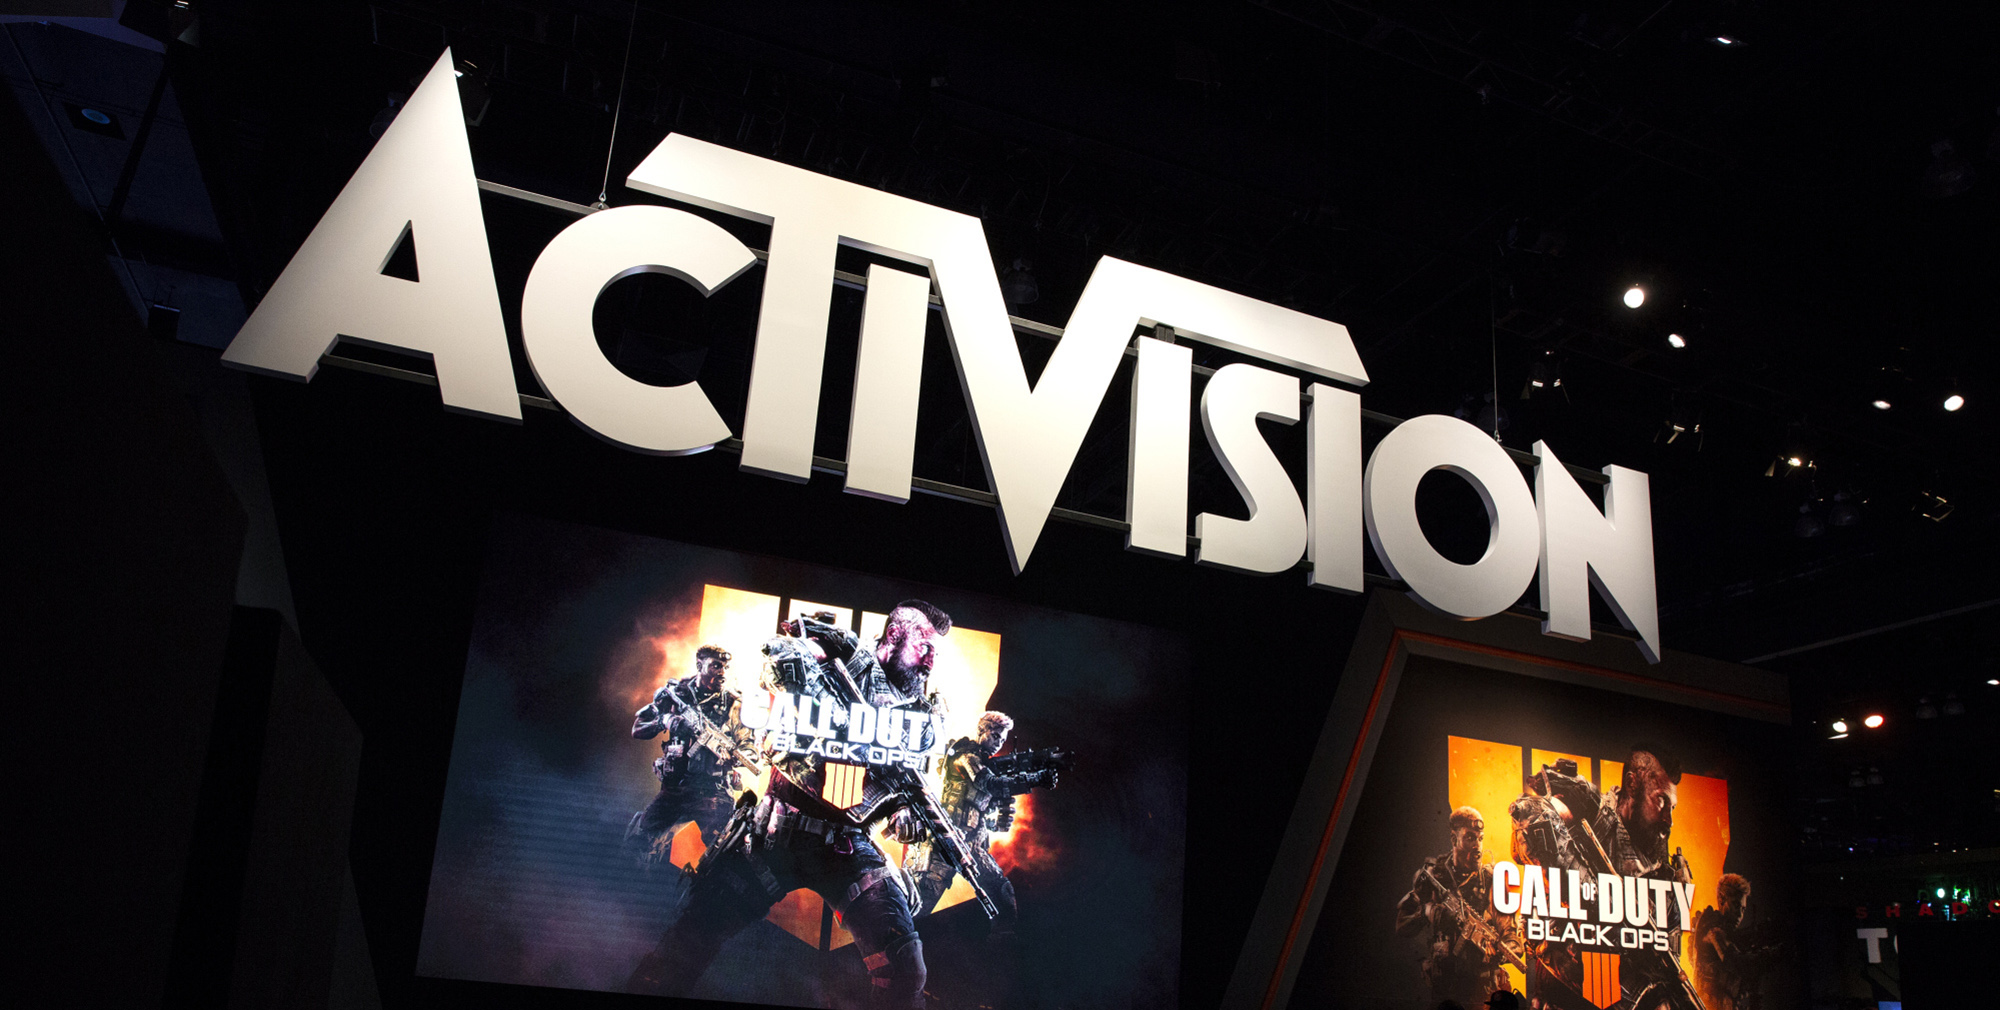 Microsoft reportedly plans to bring Activision Blizzard games to Game Pass  ASAP - Xfire